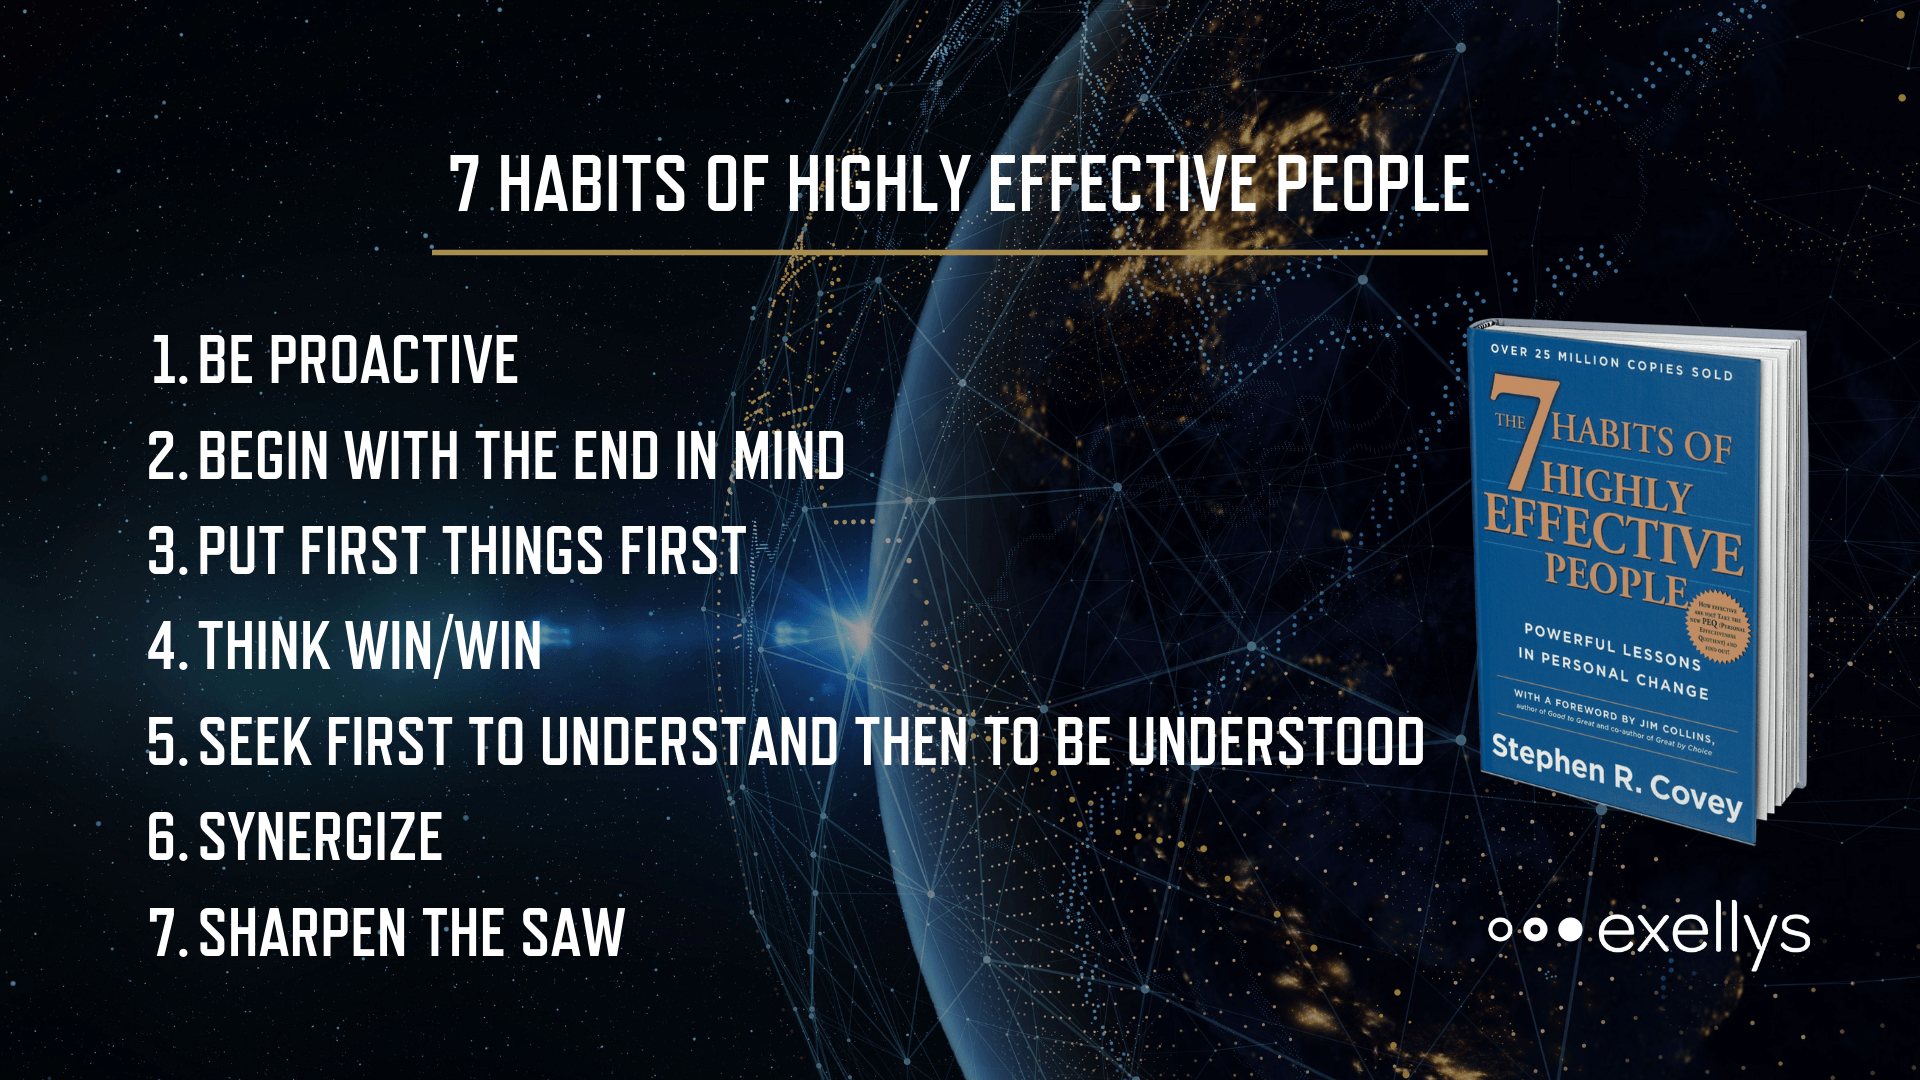 How to adopt the 7 habits of highly effective people